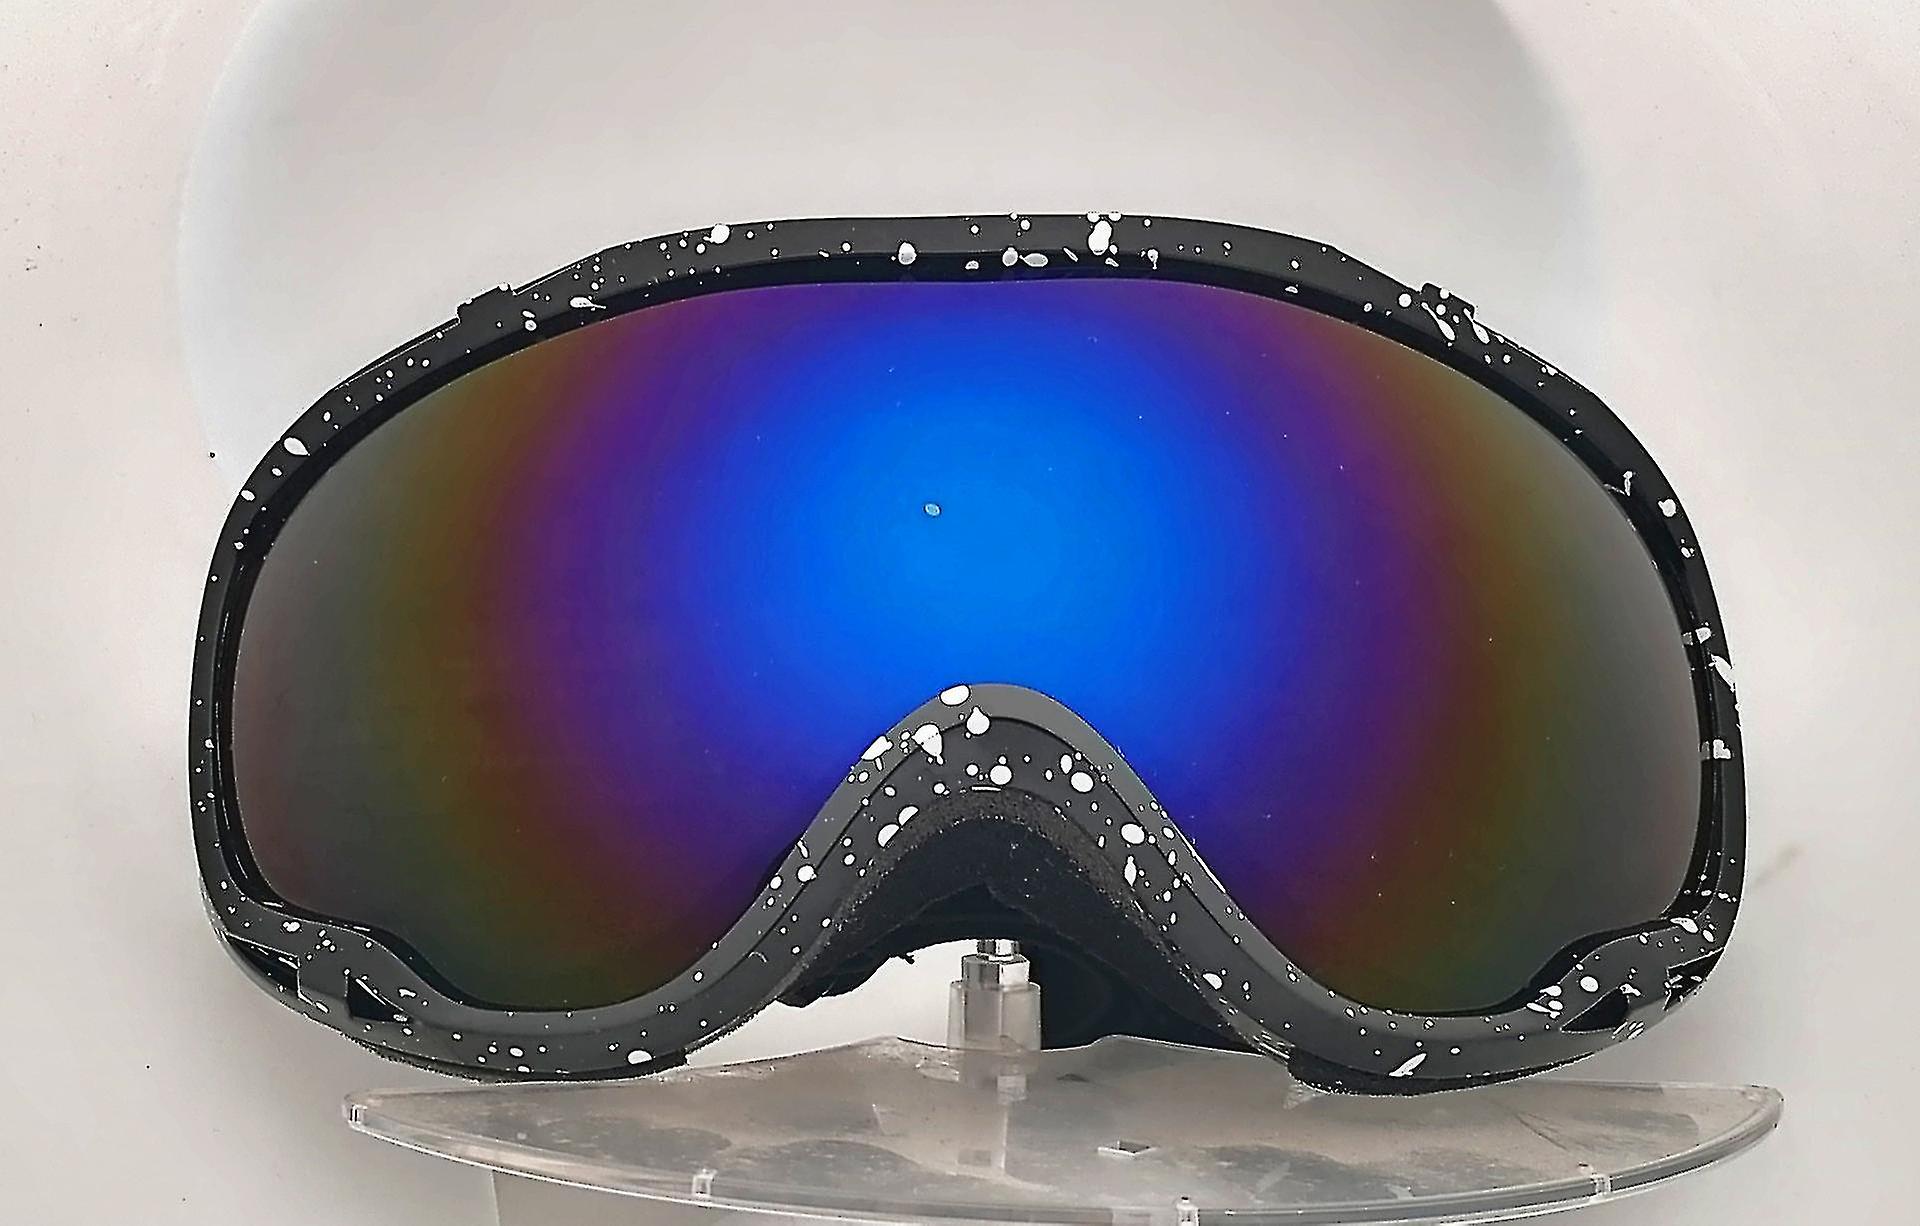 Ski Snowboard Goggles With Uv400 Protection Skiing Snowboarding Goggles Of Dual Lens With Anti Fog Helmet Compatible